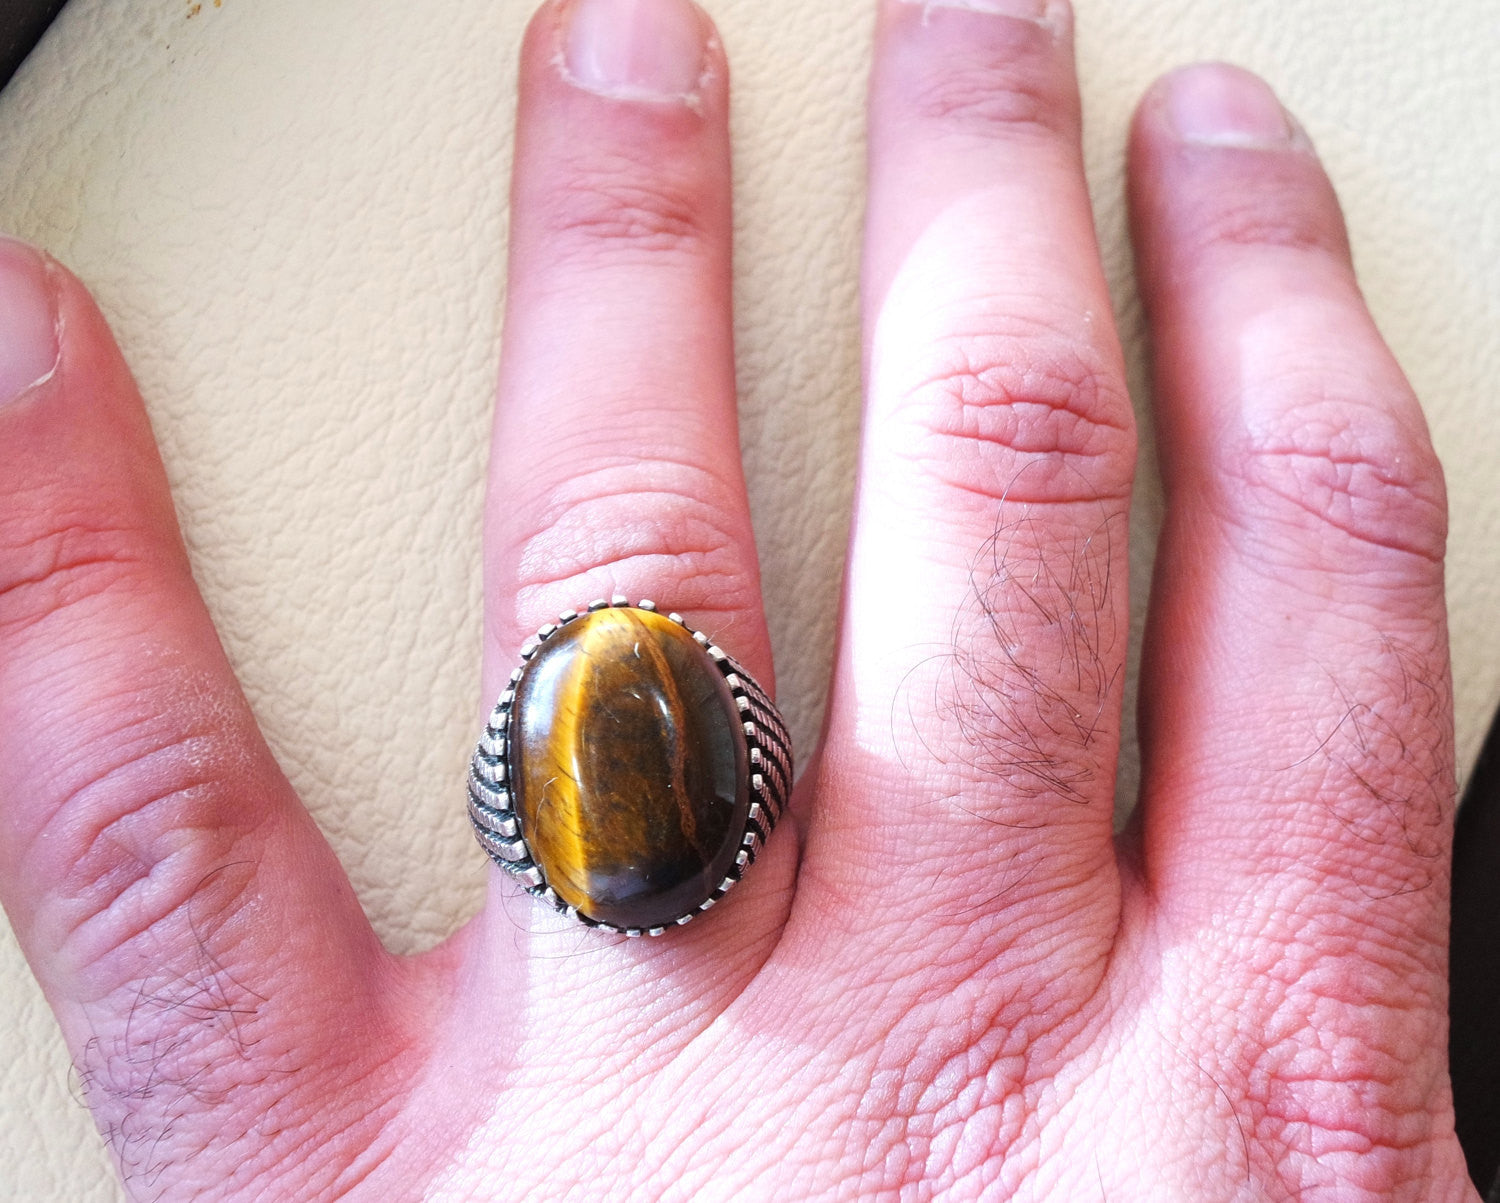 cat eye tiger eye semi precious naturl stone heavy men ring sterling silver 925 any size ottoman turkish middle eastern jewelry